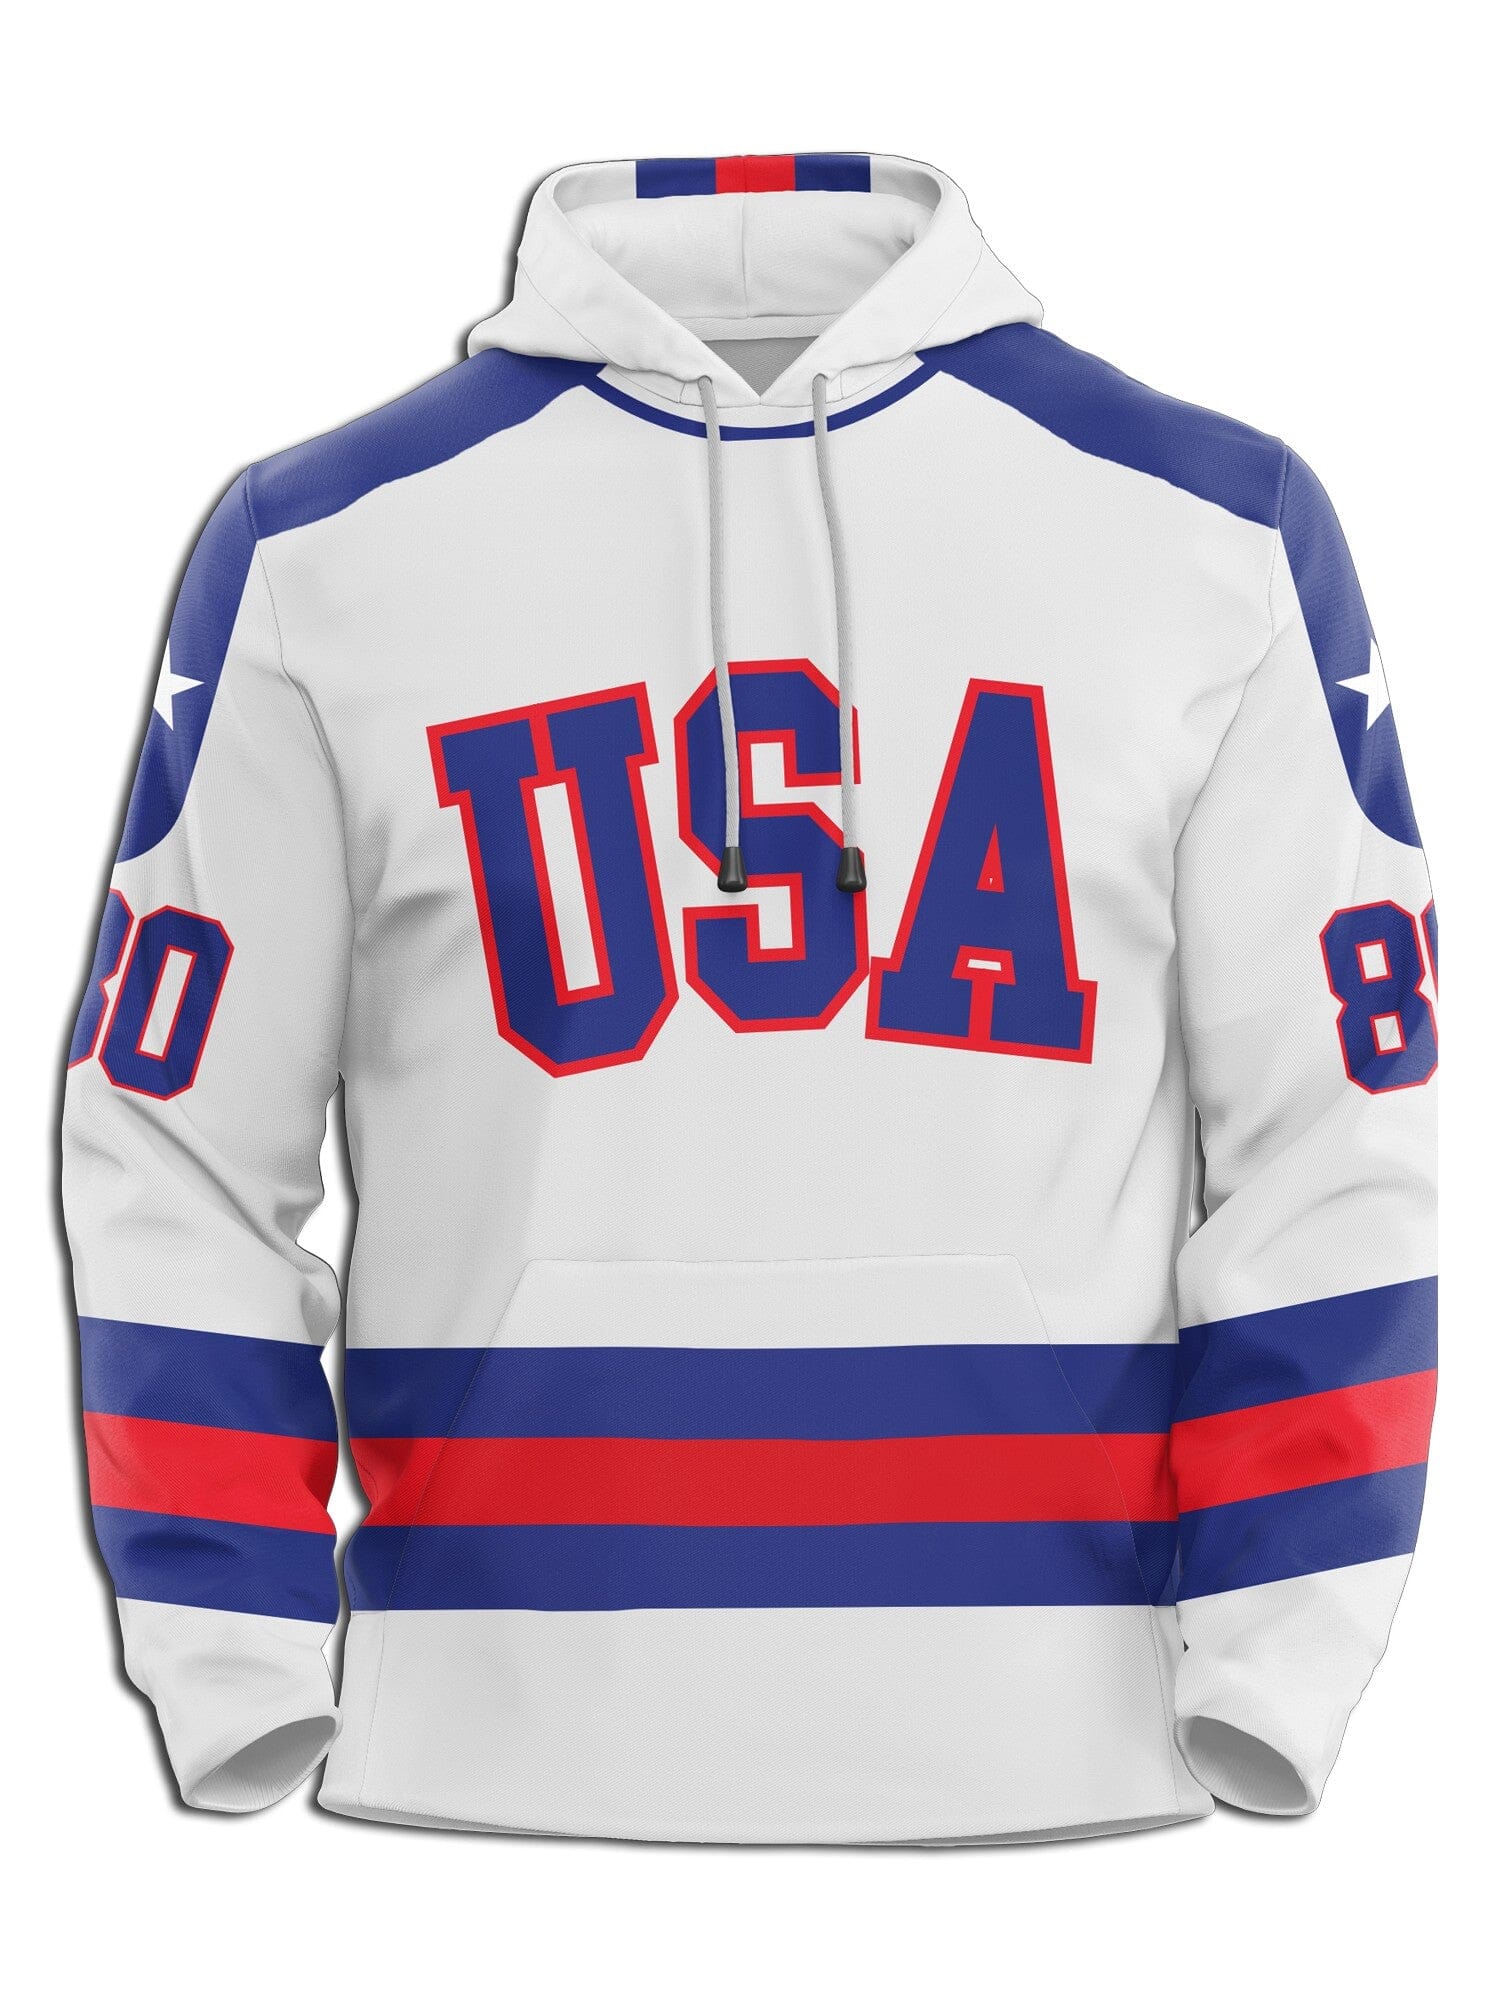 USA Miracle on Ice 1980 Away Hockey Hoodie Hockey Hoodie BenchClearers YOUTH S White Polyester